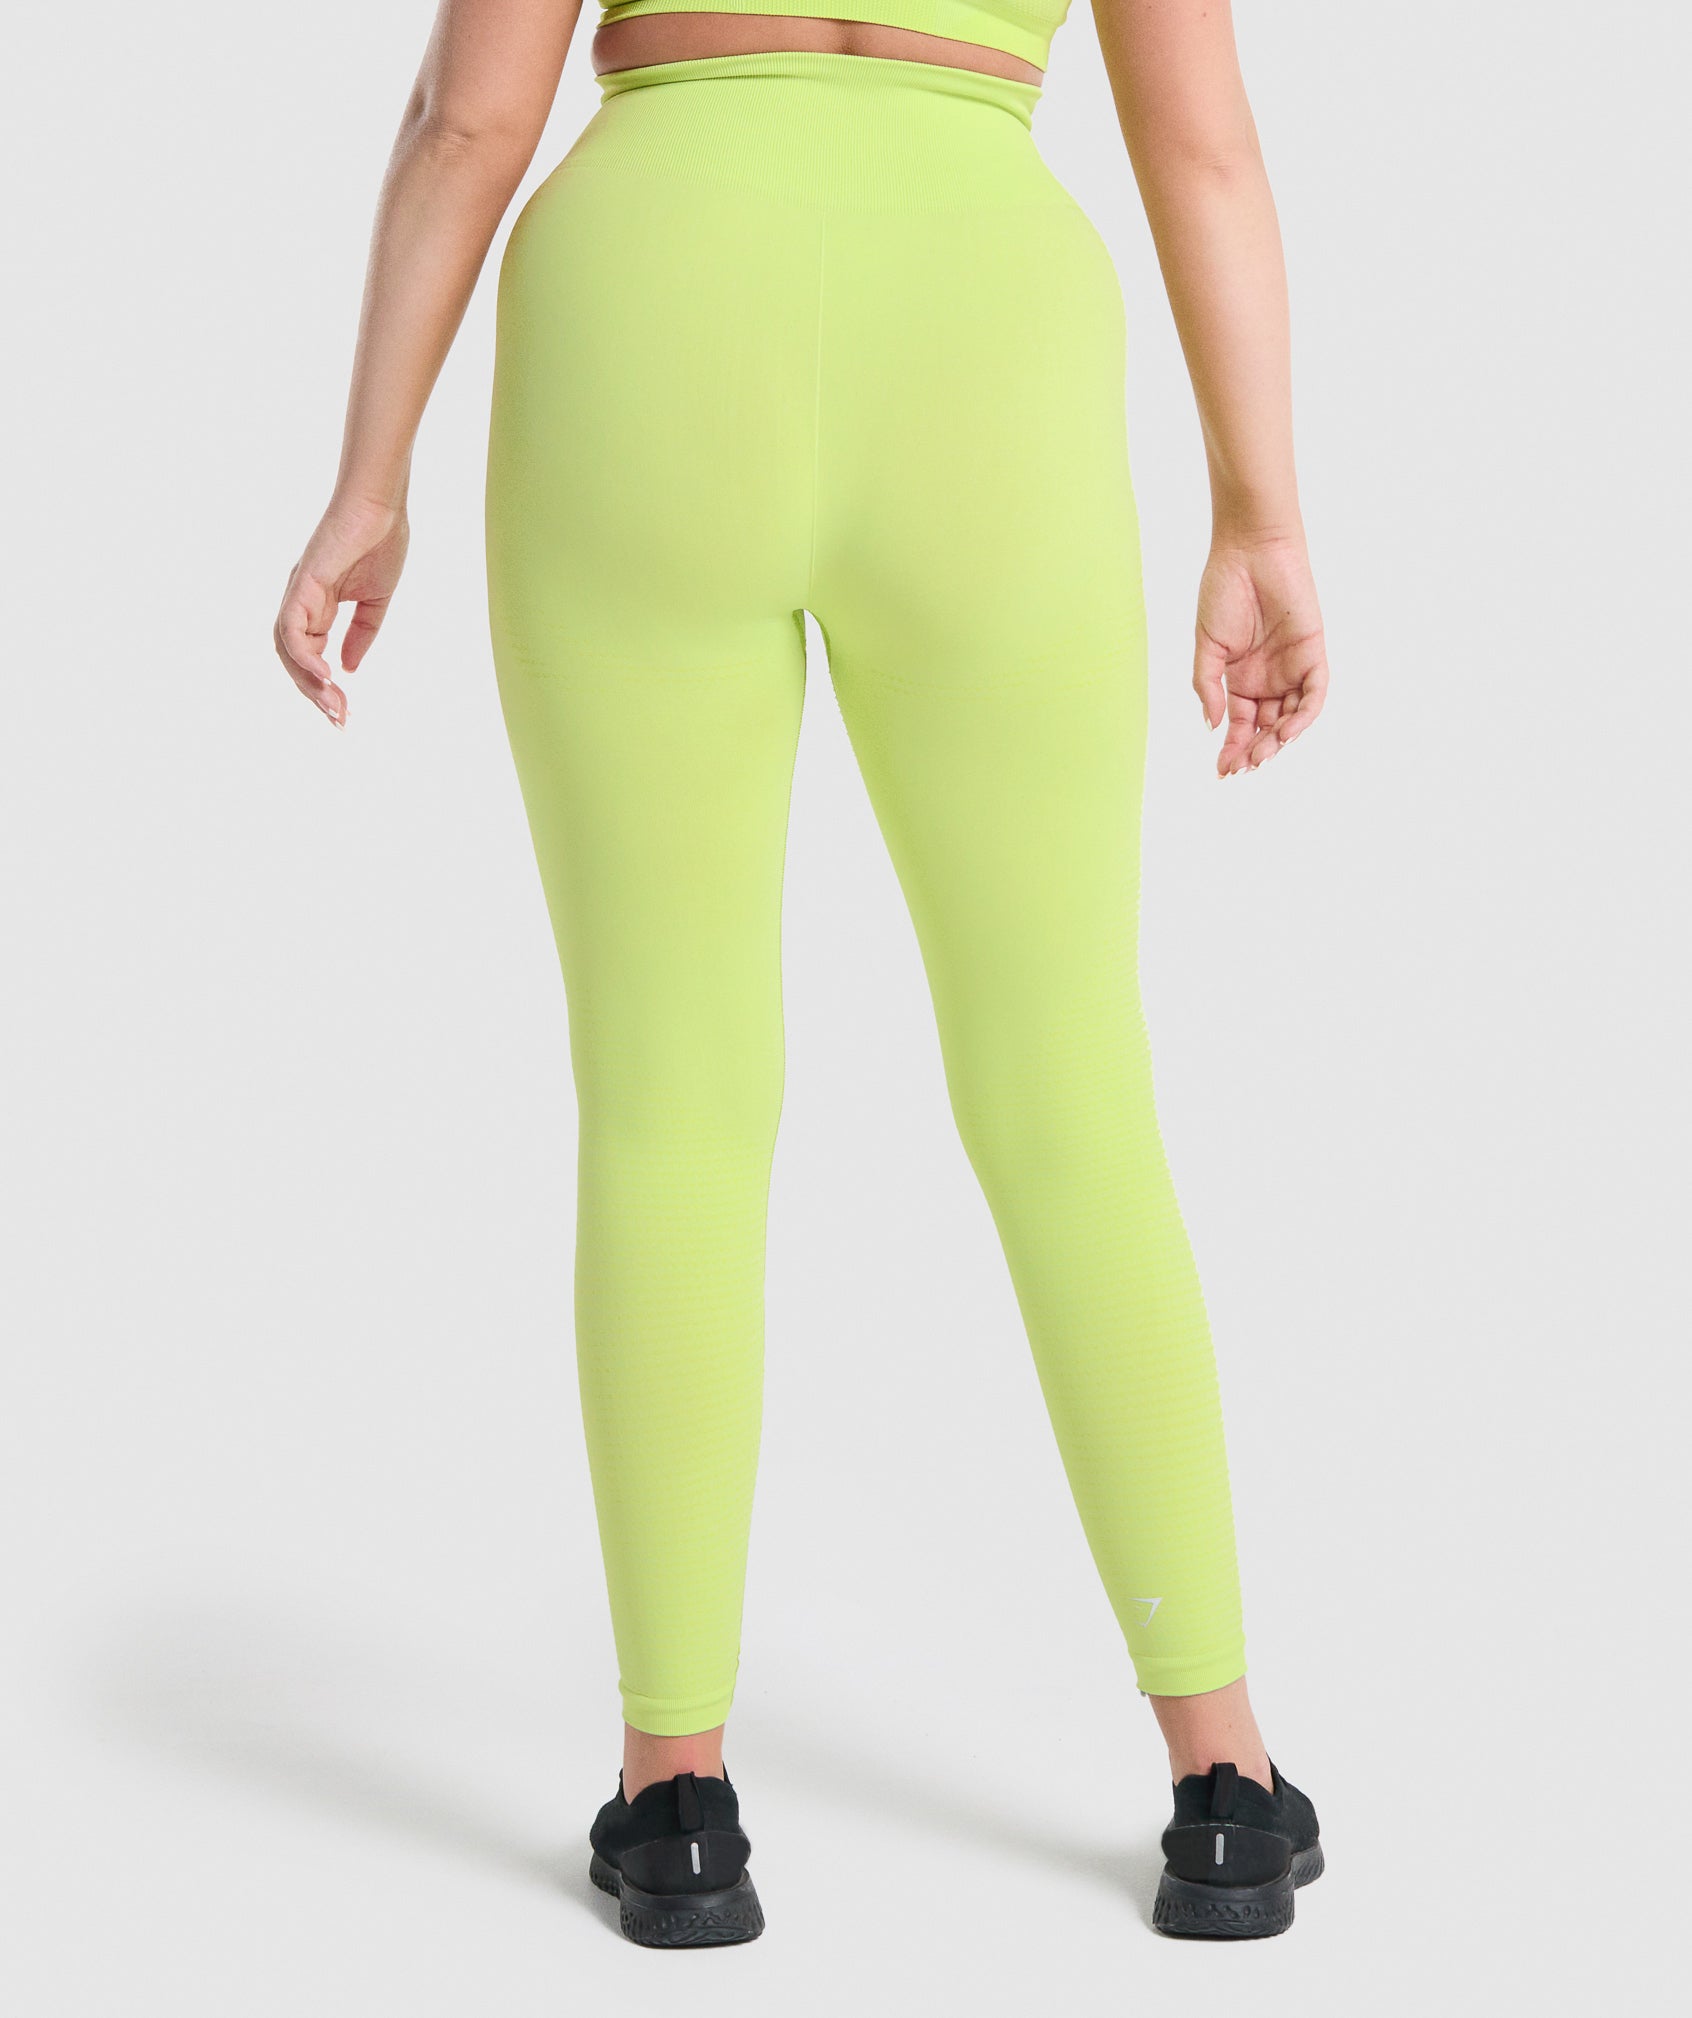 GYMSHARK Gymshark FIT SEAMLESS - Leggings - Women's - charcoal/Moroccan  yellow - Private Sport Shop